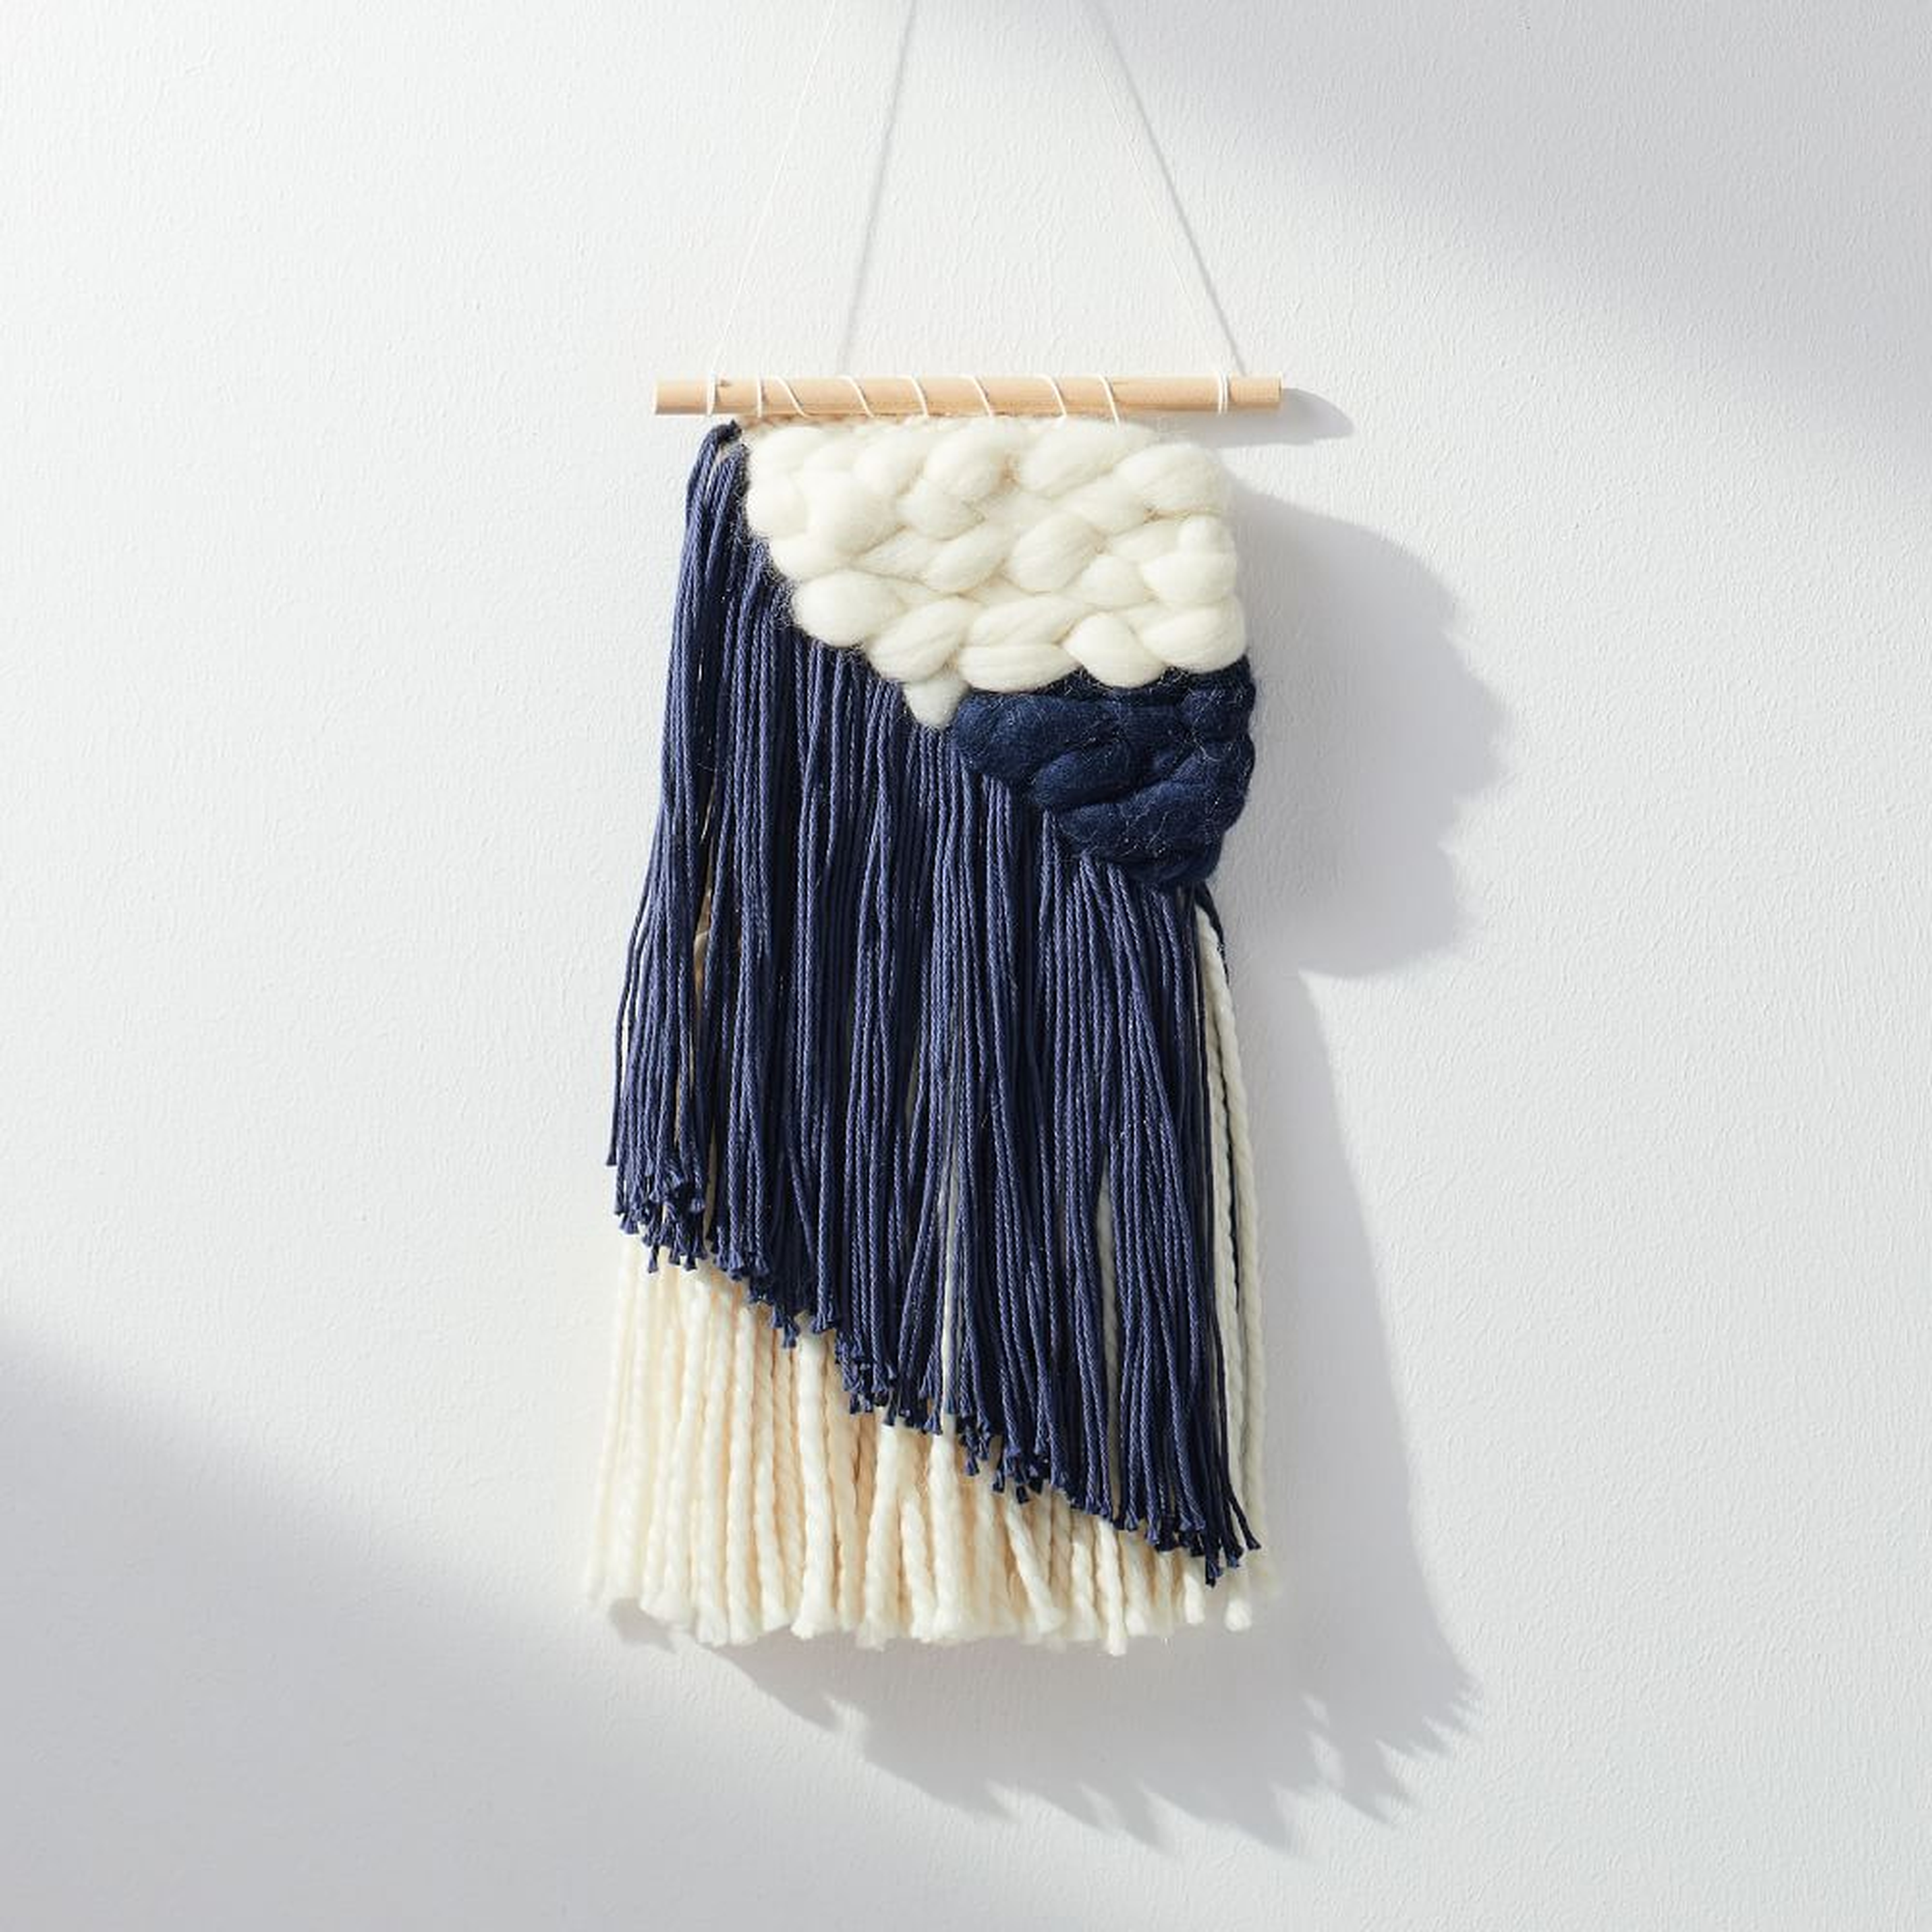 Sunwoven Wall Hanging, Small, Navy - West Elm